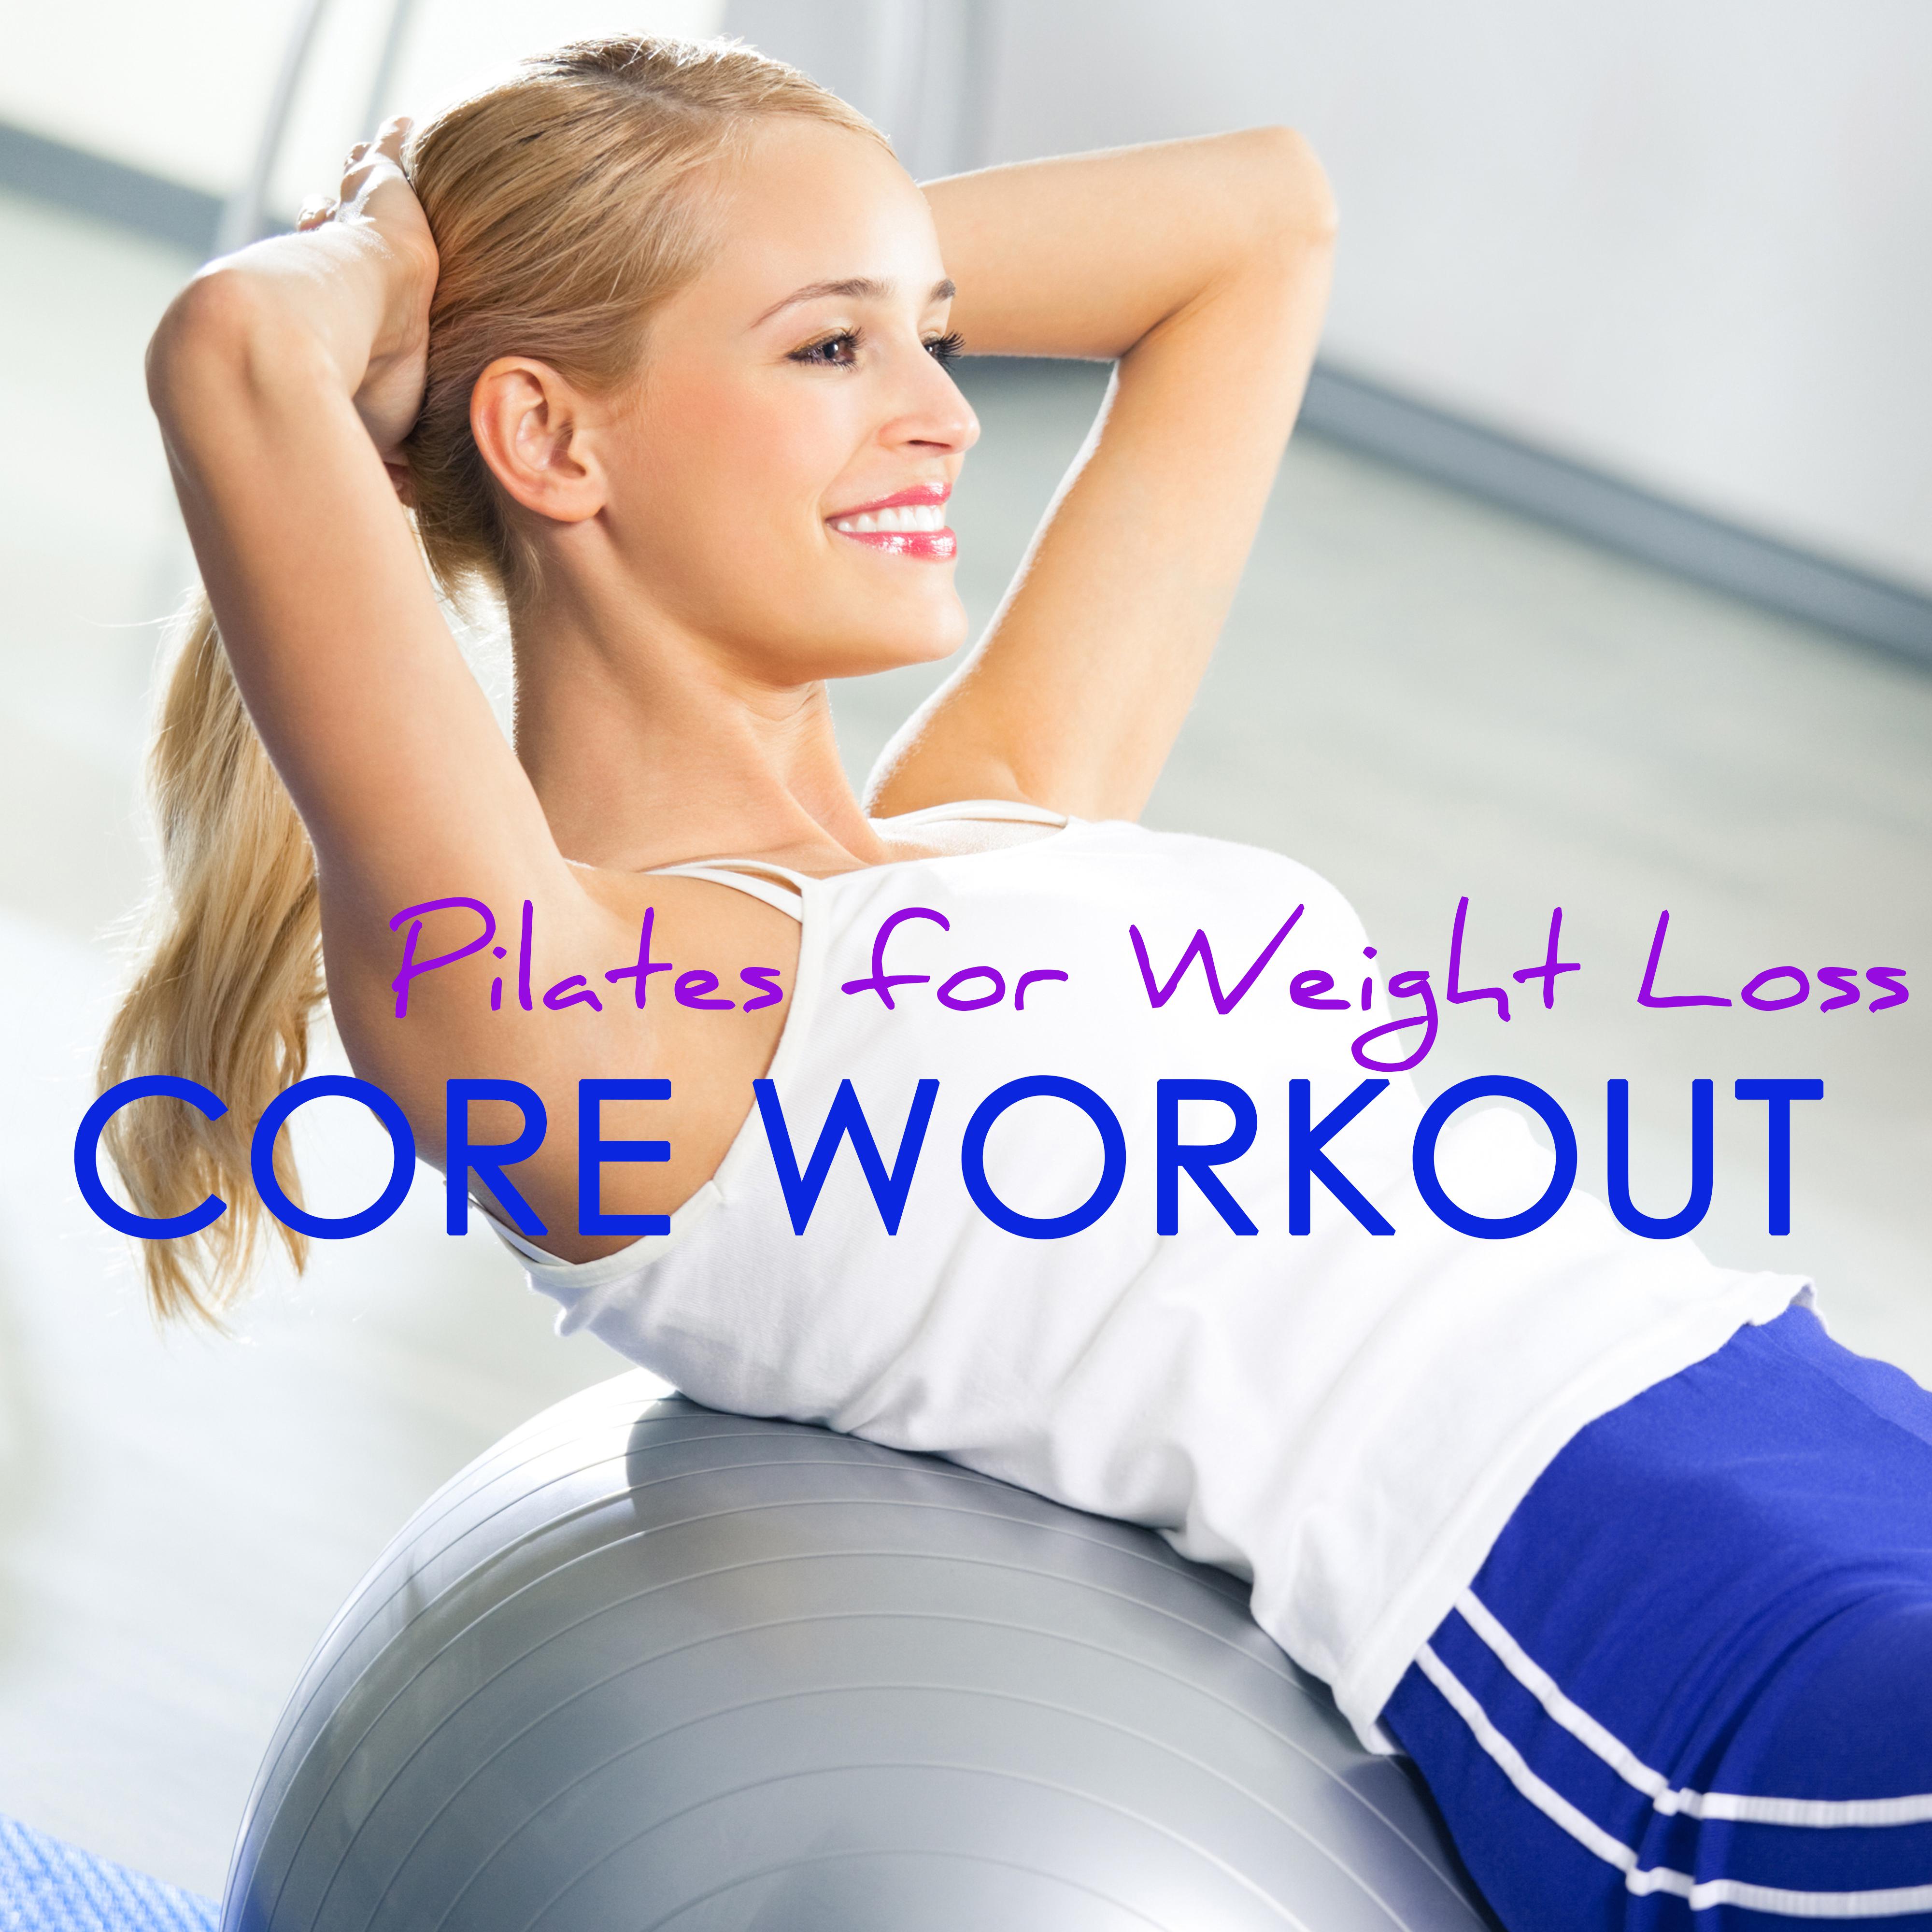 Core Workout - Pilates for Weight Loss, Electronic Songs for  Ab Workouts, Ab Exercises for Women Fitness